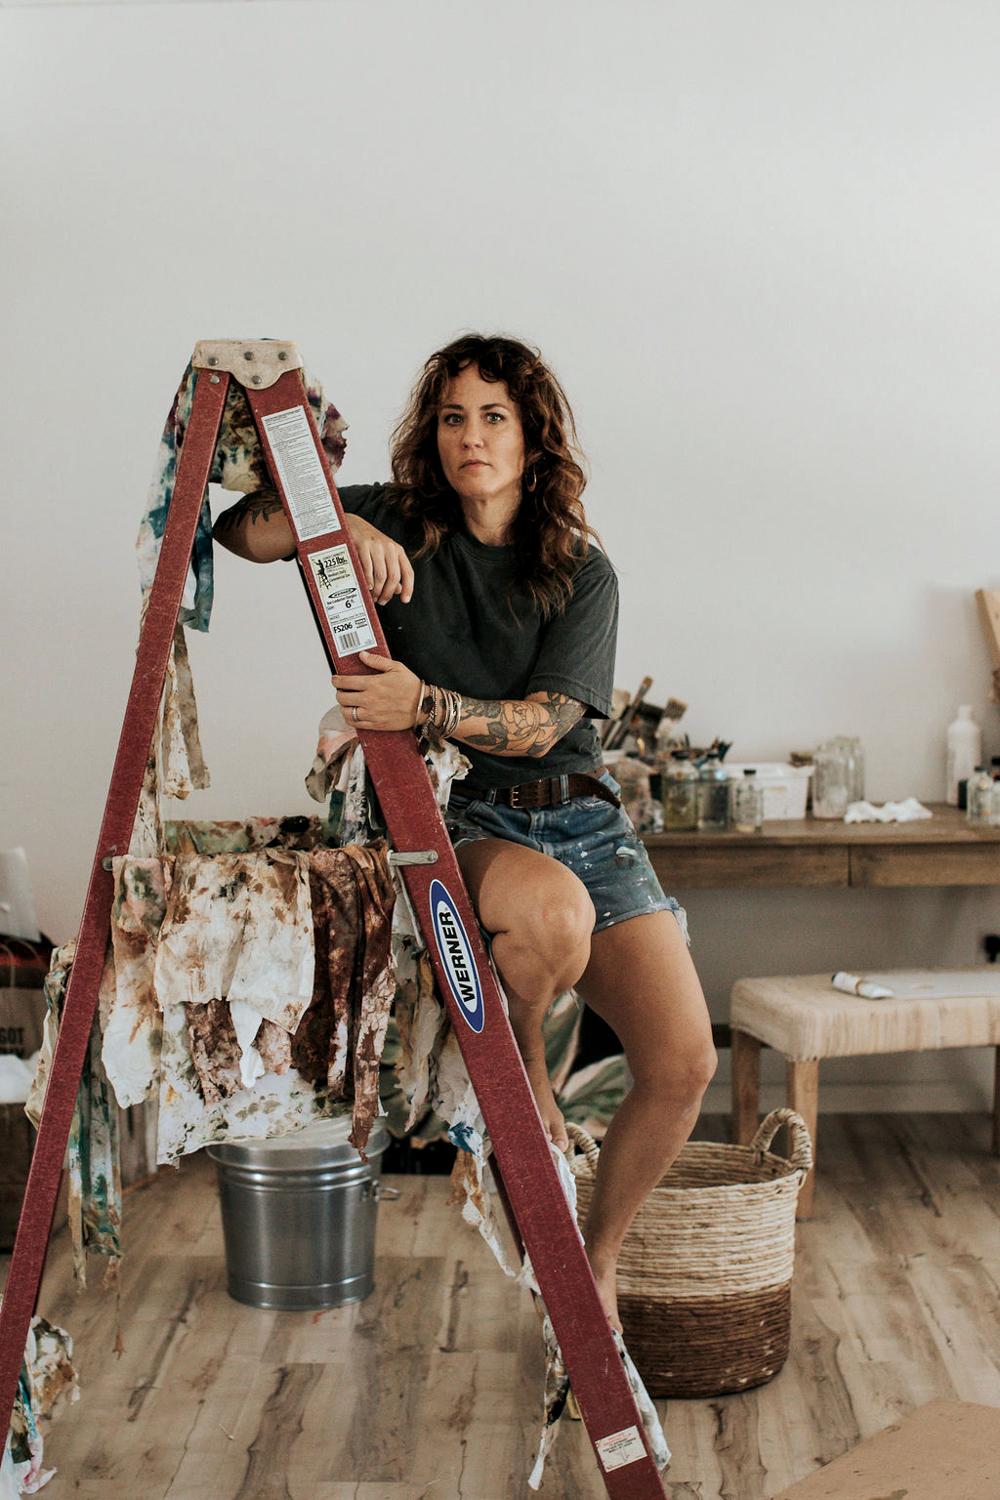 Kristy Gammill sitting on a red ladder draped with worn rags